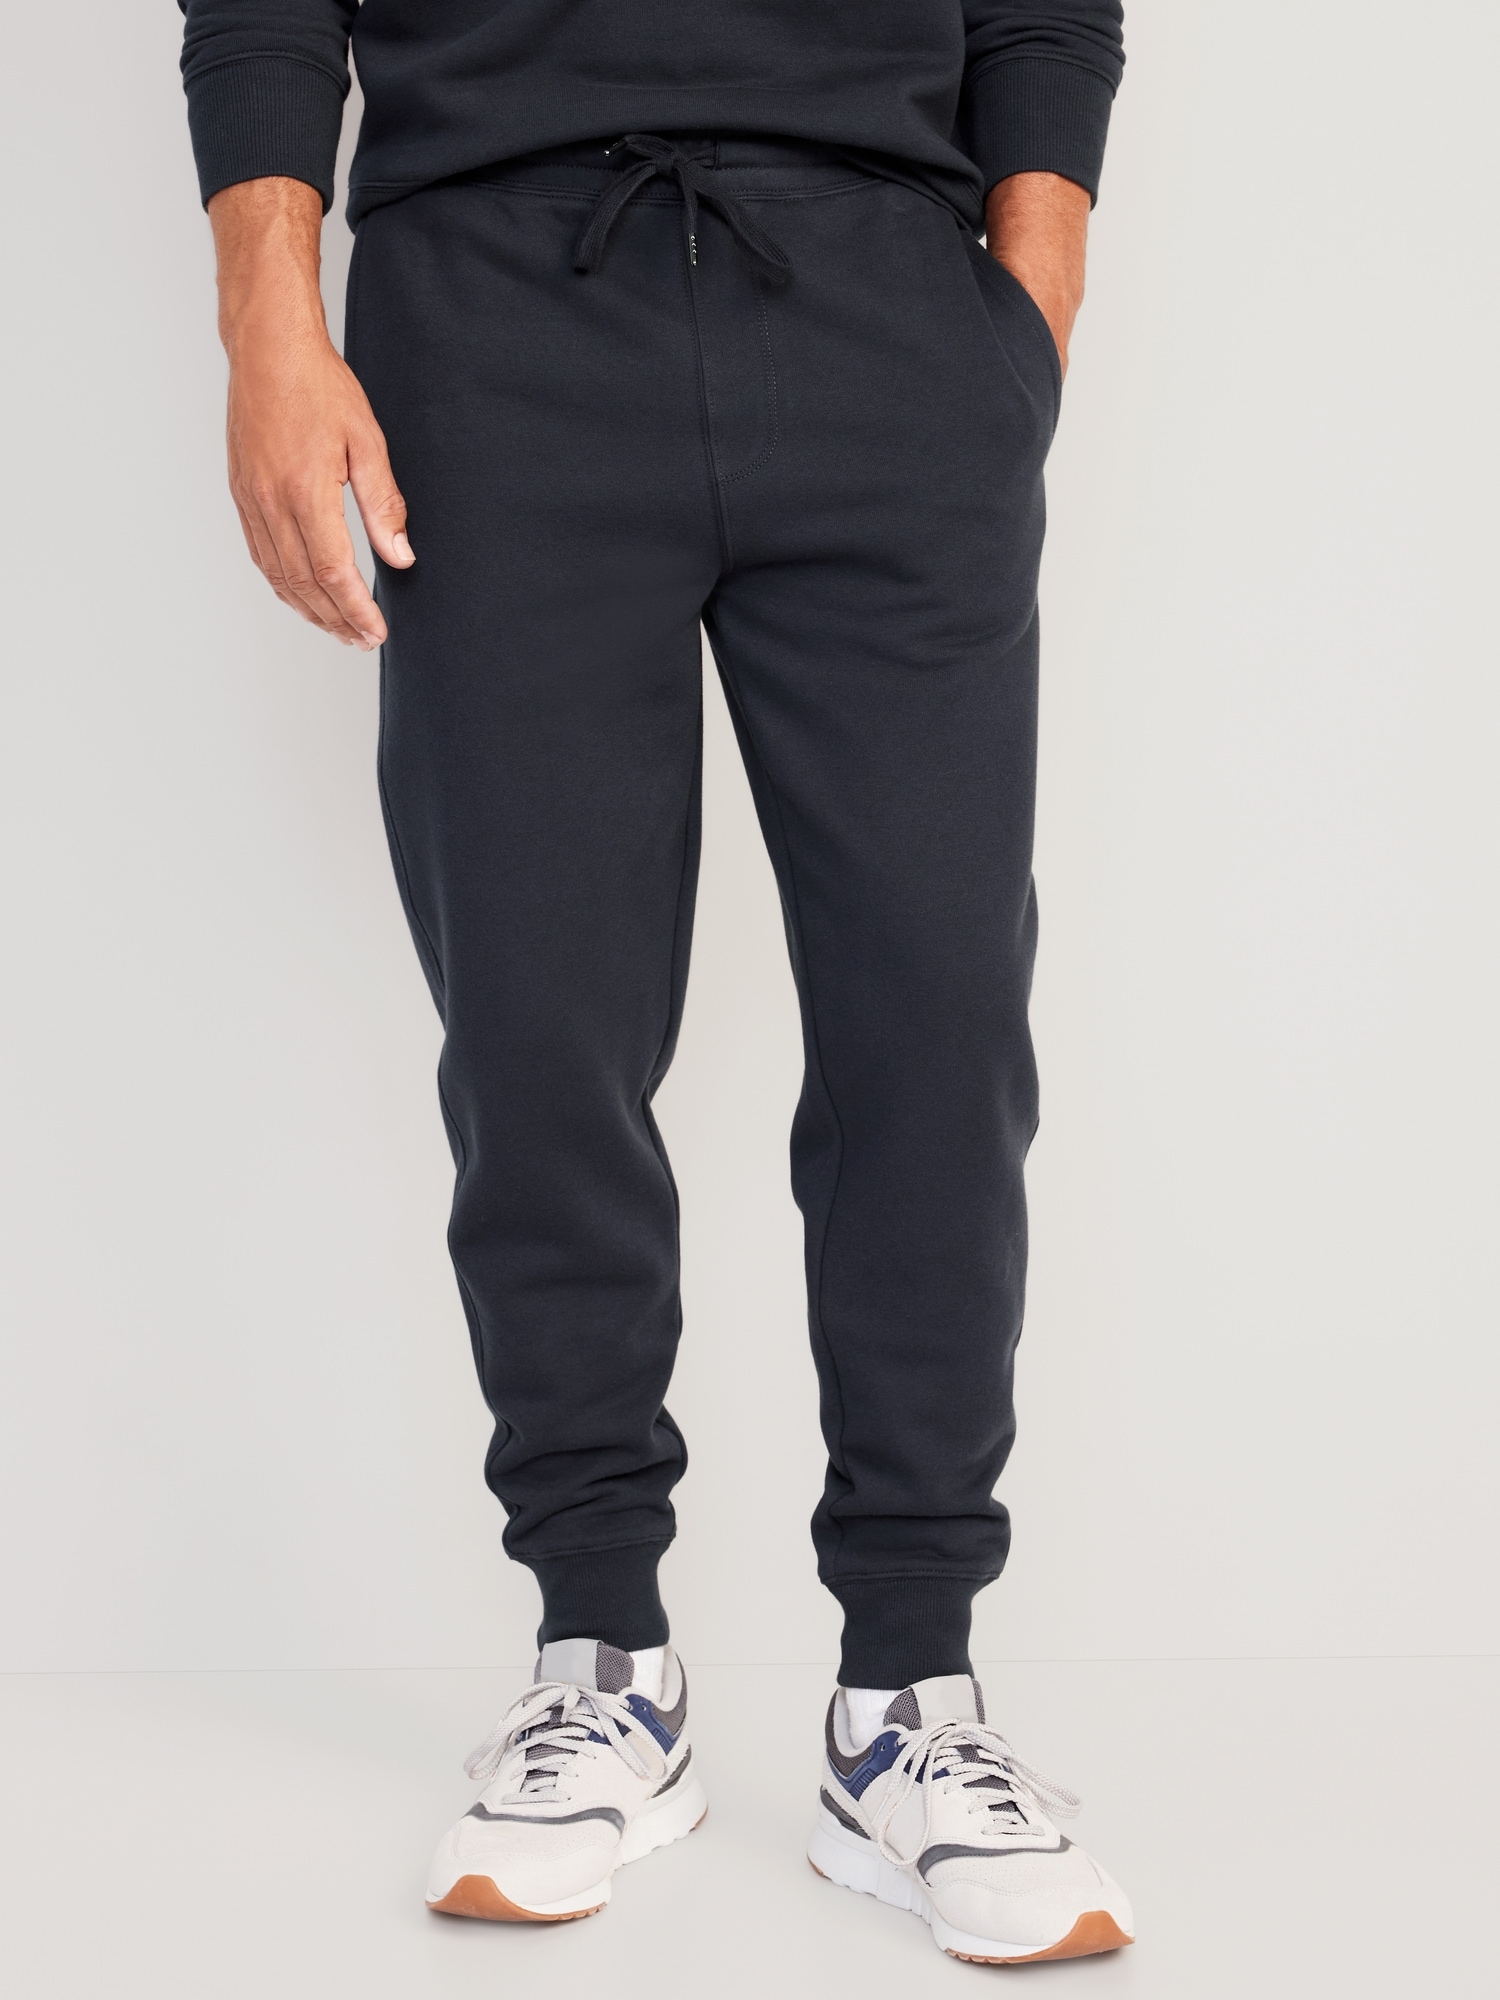 Loose Jogger Sweatpants for | Old